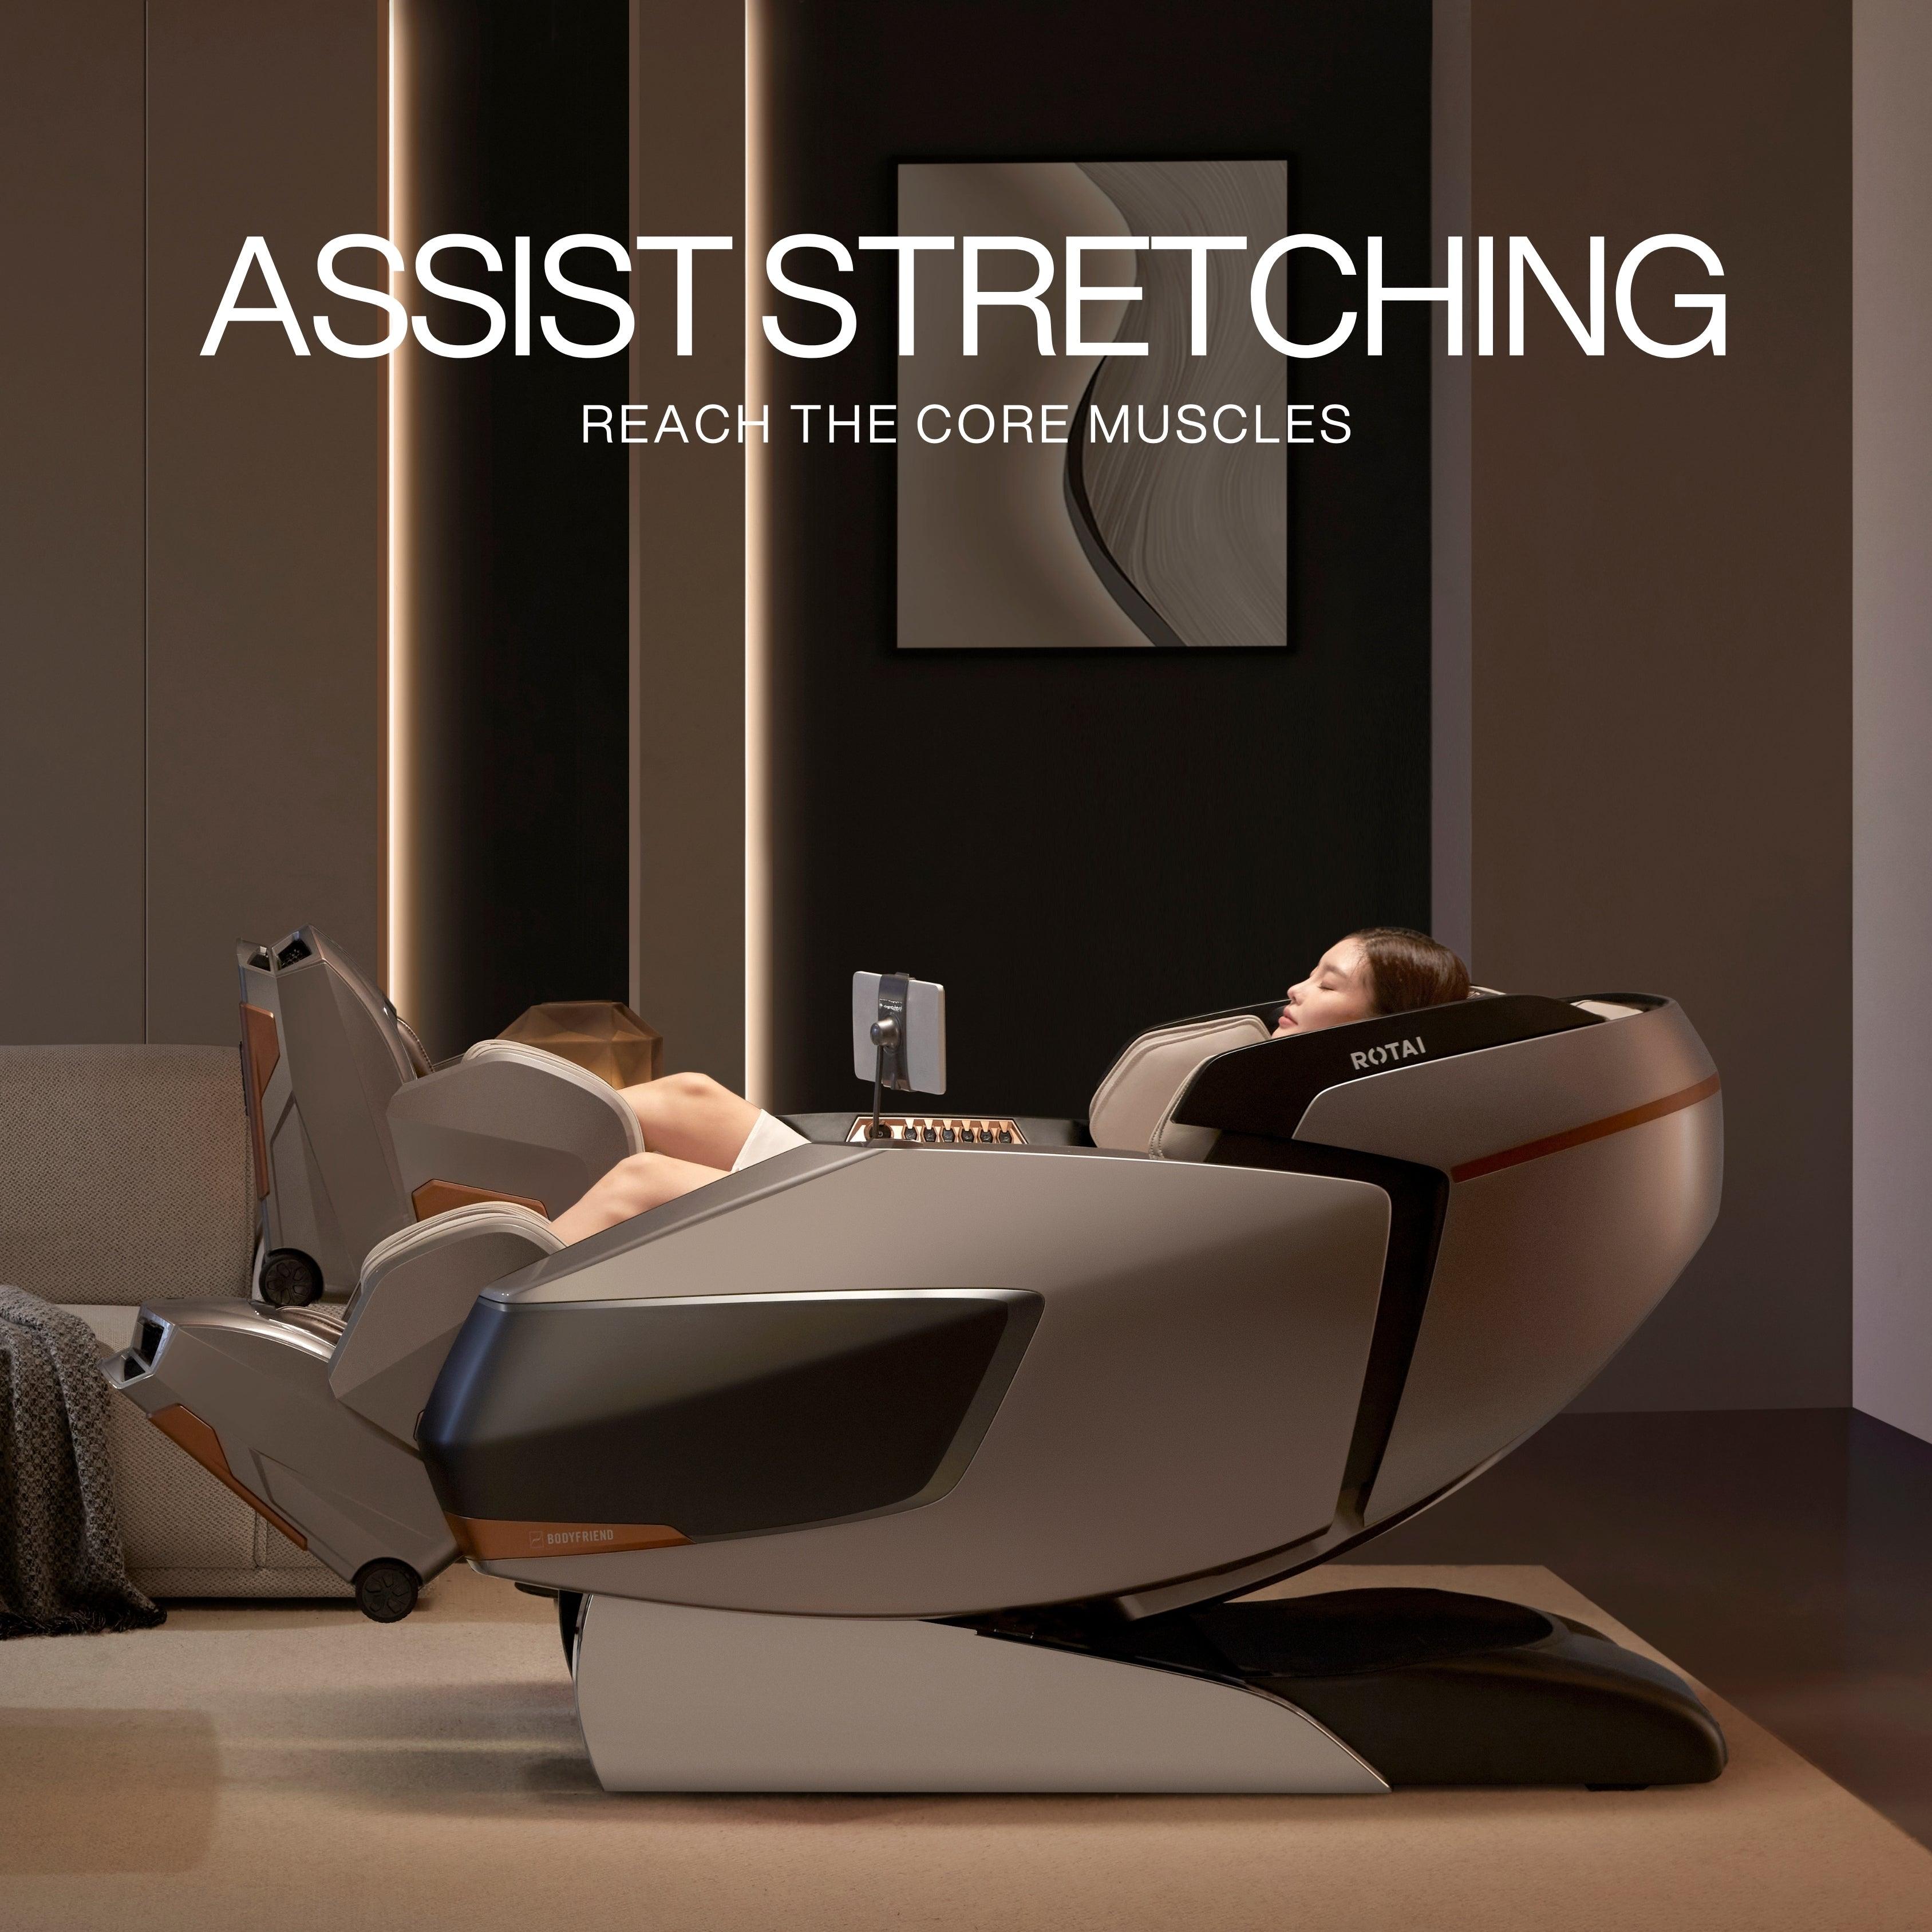 AI Robotic Massage Chair (Glacier Silver) with assist stretching technology for core muscle relaxation - best massage chair in UAE and Dubai, best massage chair uae, massage chair Dubai, massage chair uae, massage chair Saudi Arabia, كرسي التدليك, Best ma